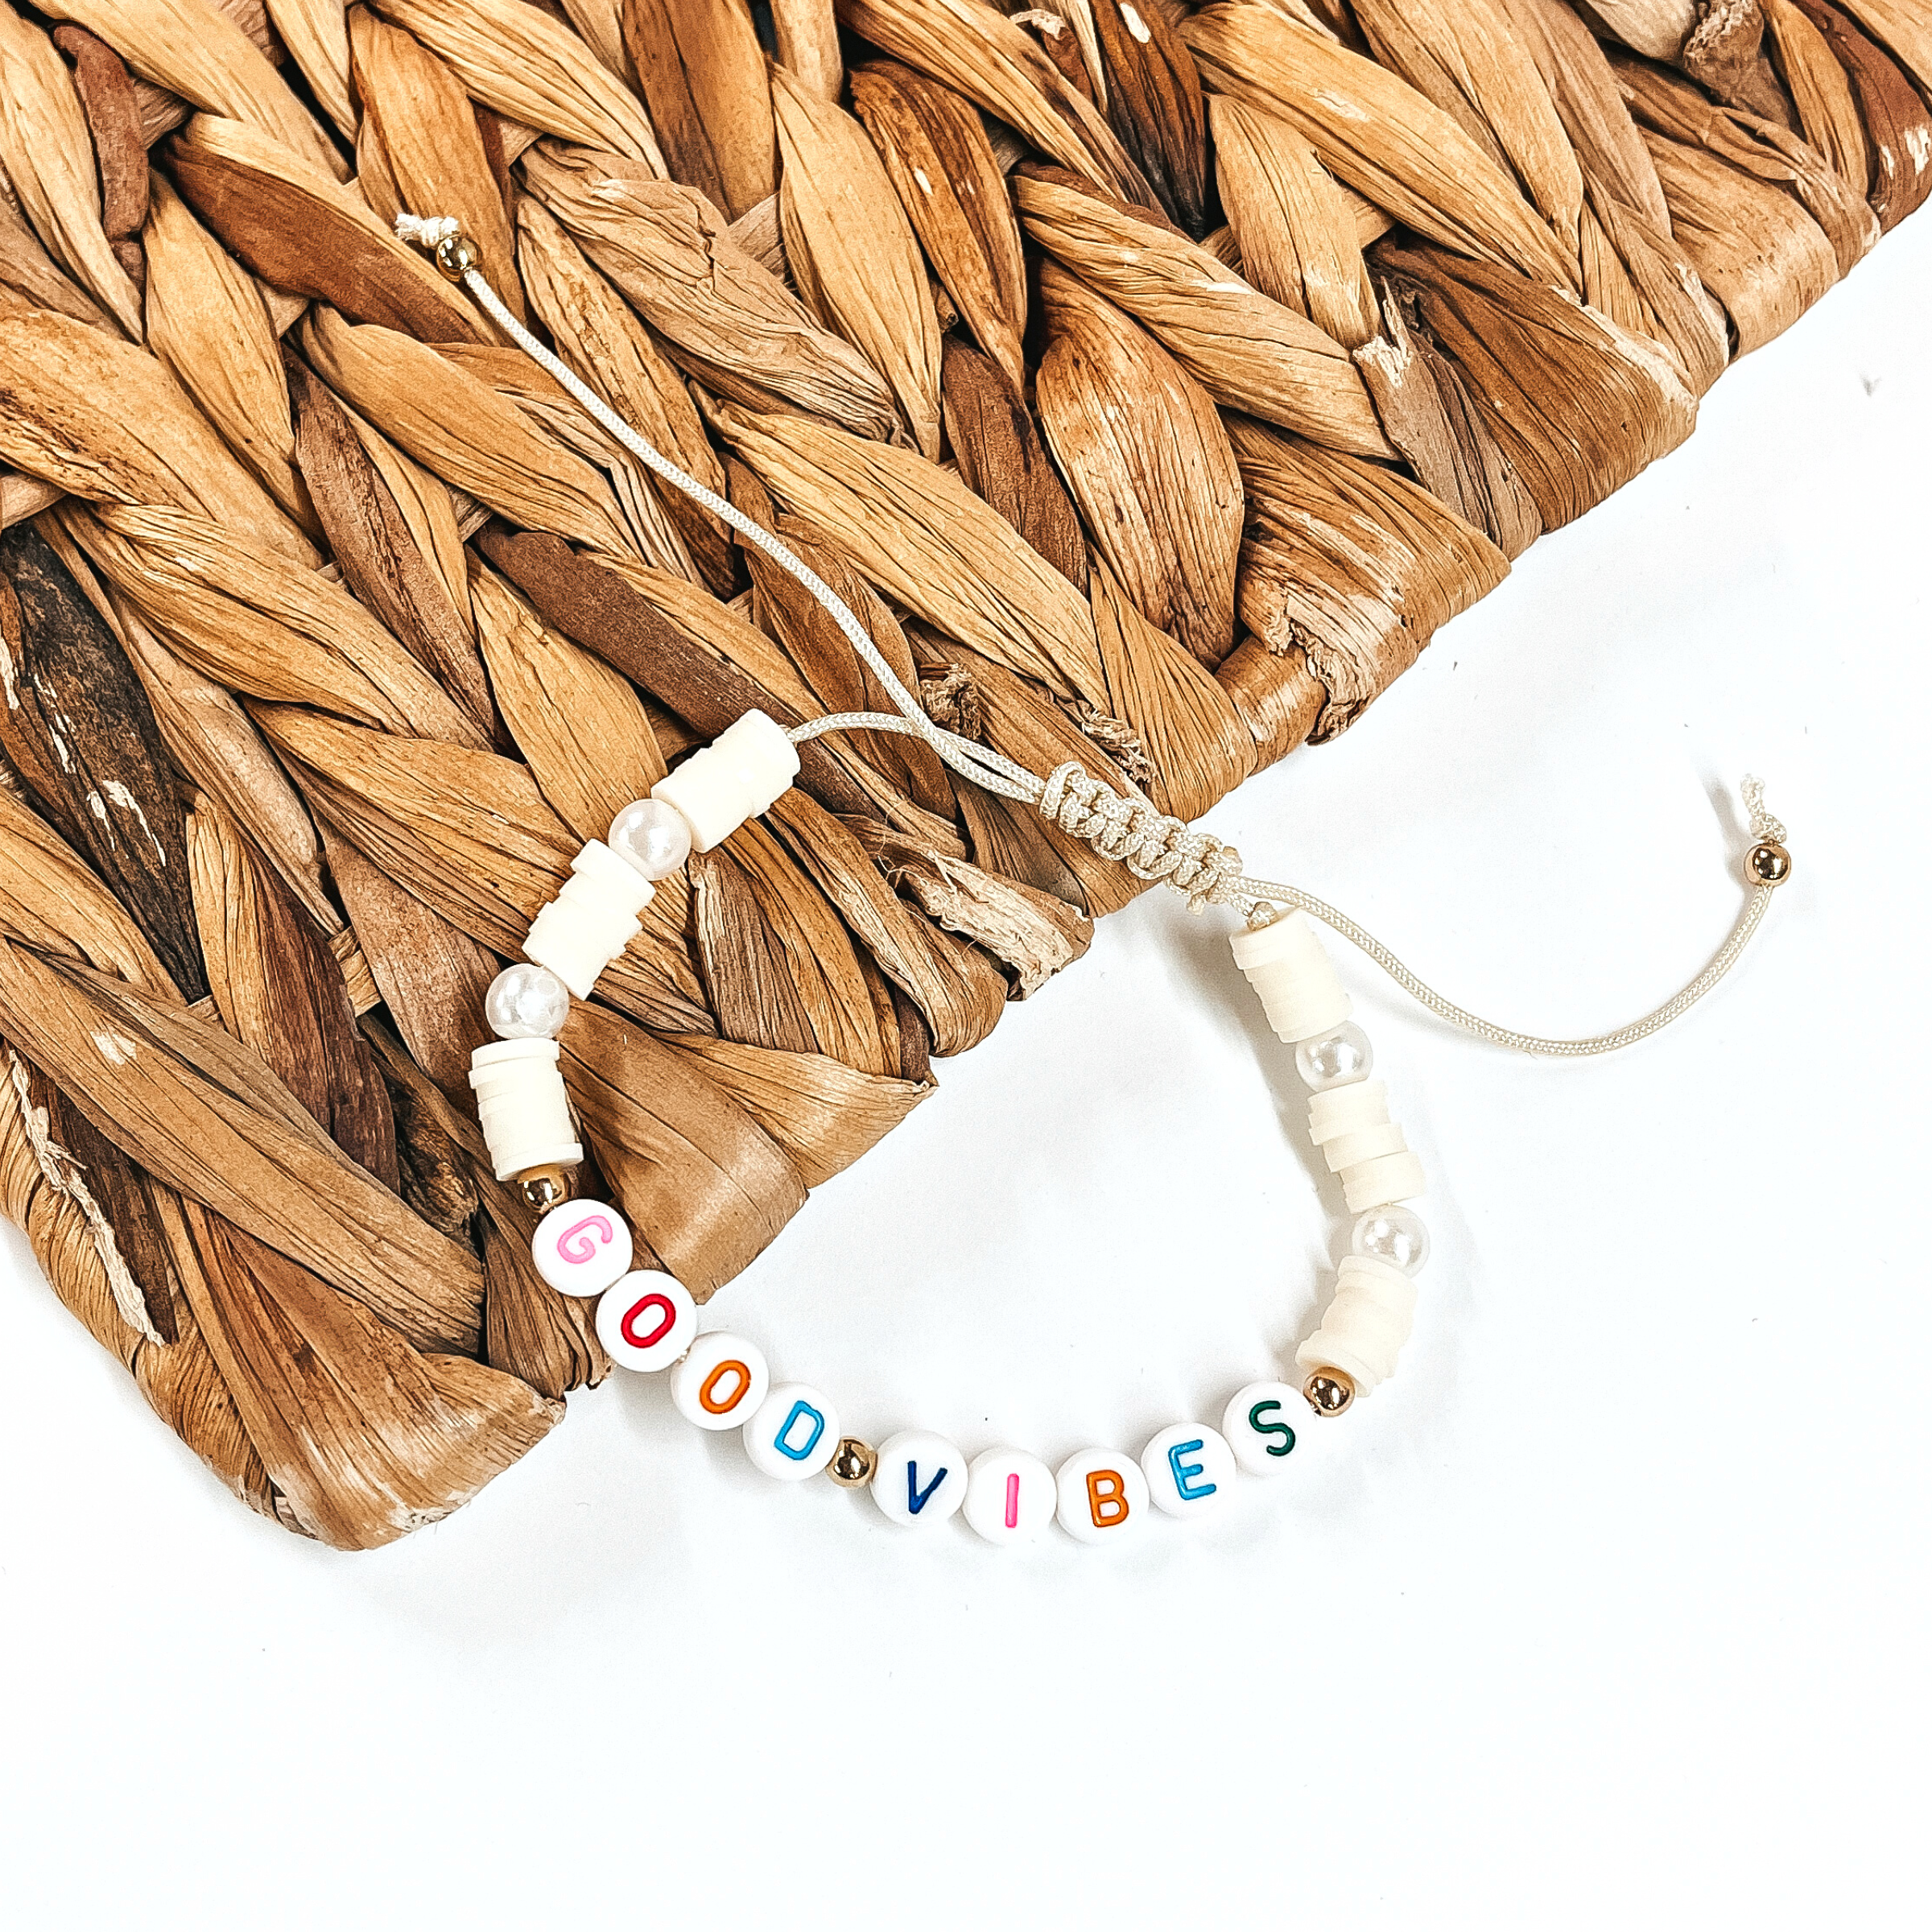 This is a disk beaded bracelet in ivory that says, Good Vibes in  different colors. There are pearl spacers.  This bracelet is laying partly on a woven slate and on a white background.